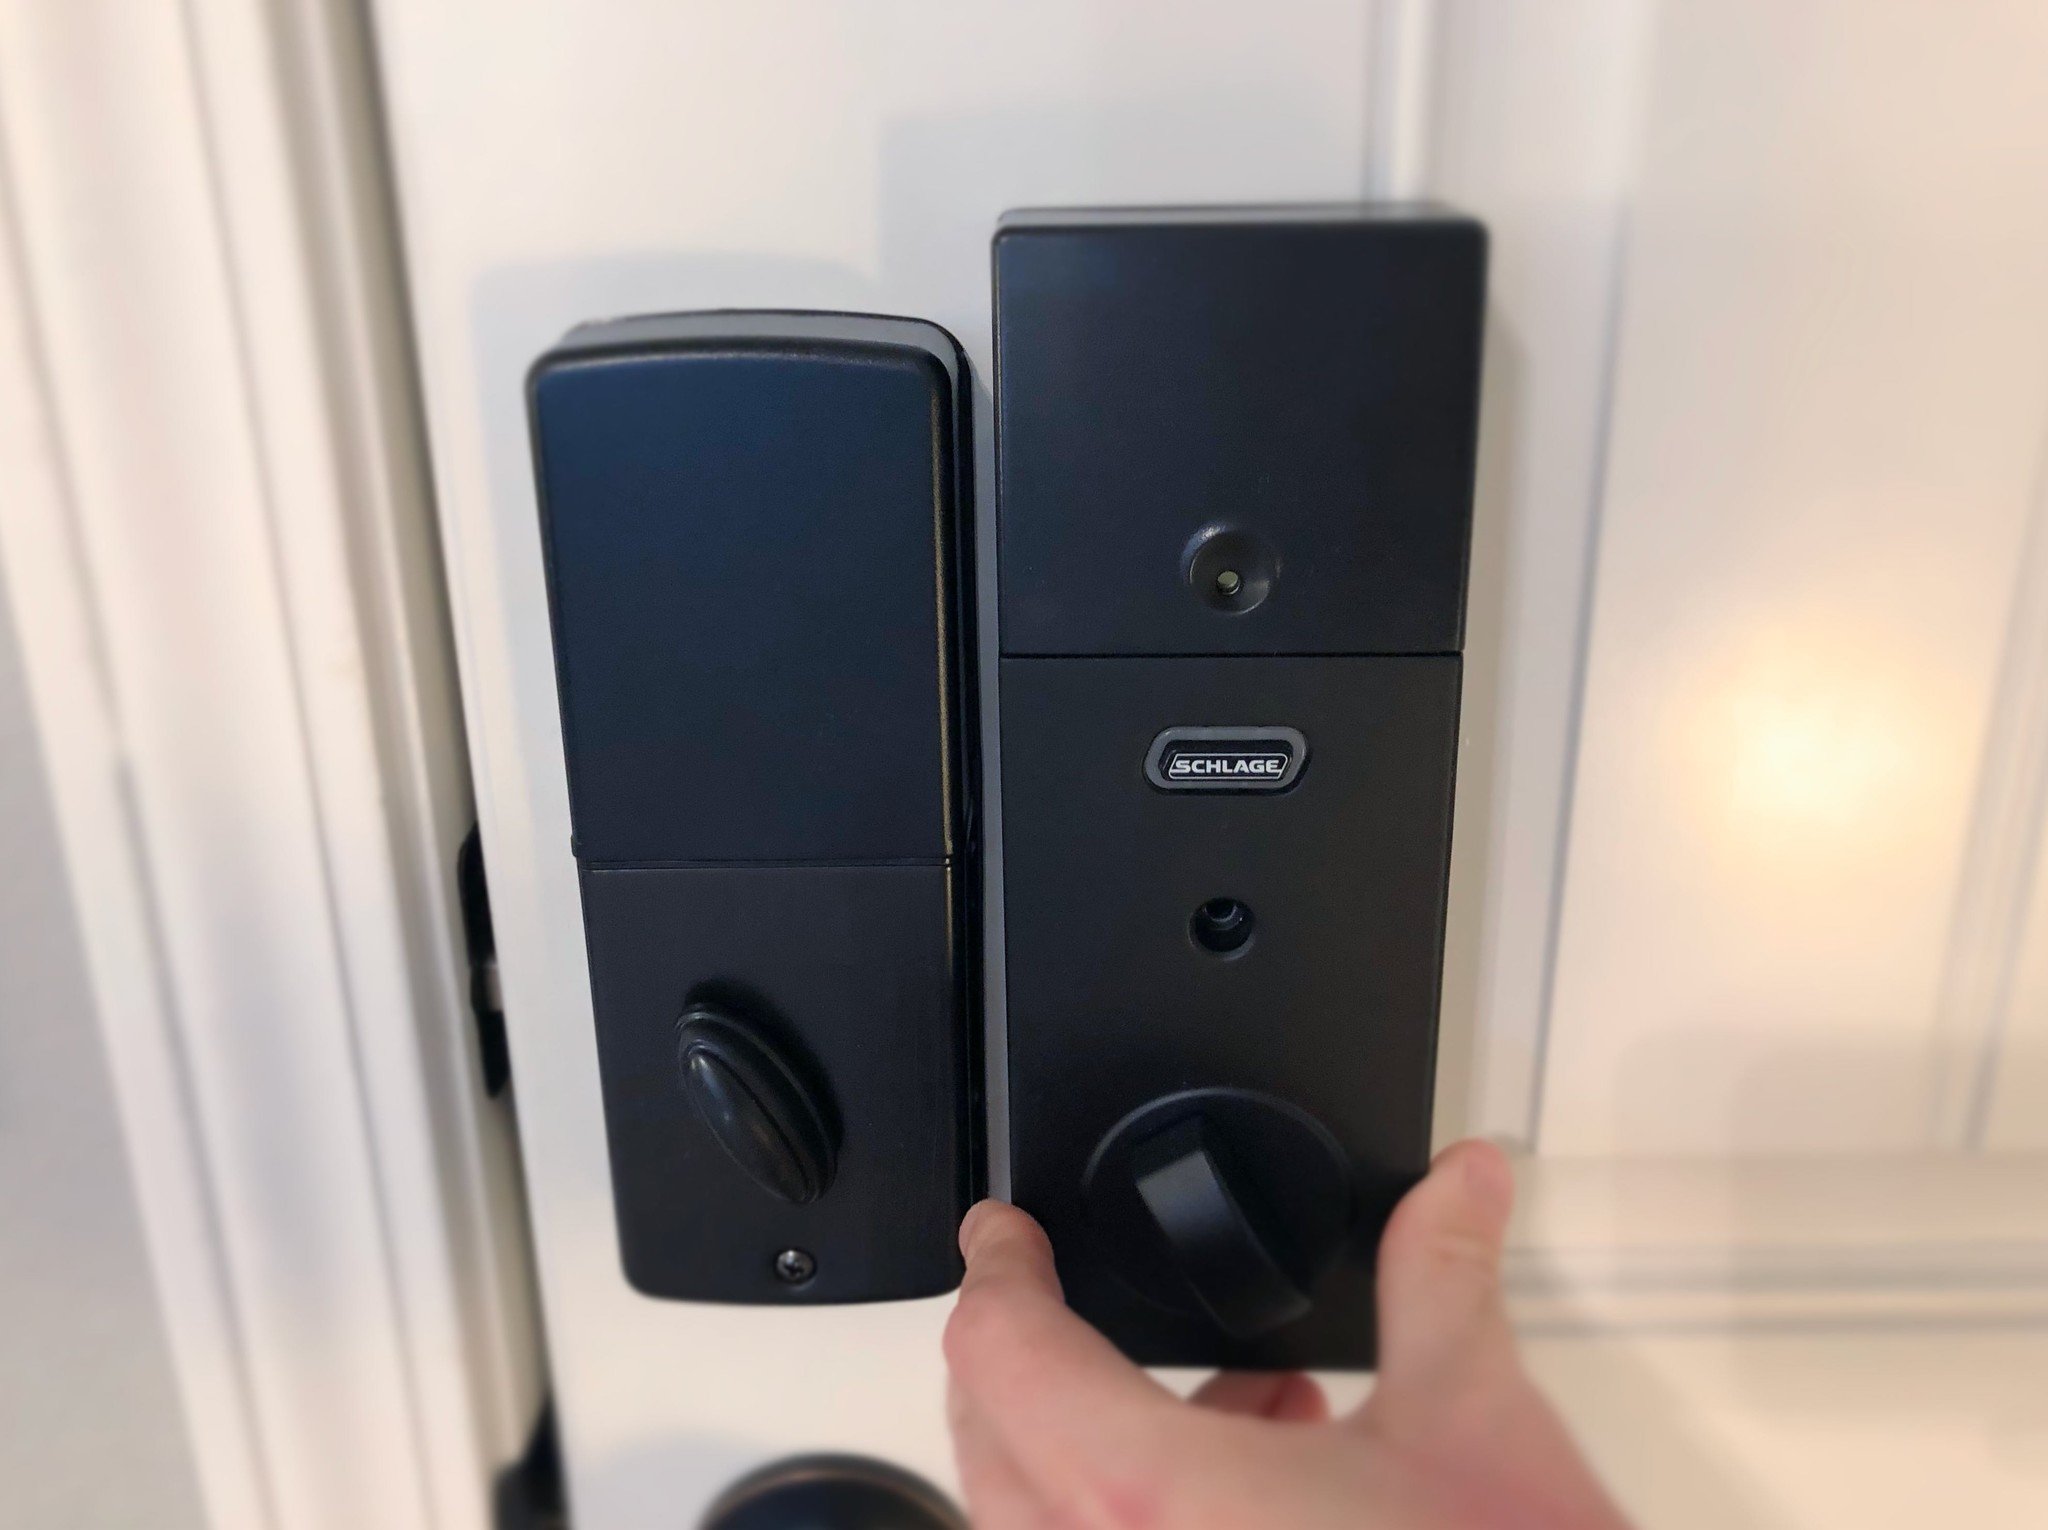 Schlage Sense indoor assembly compared to Reagle Smart Lock